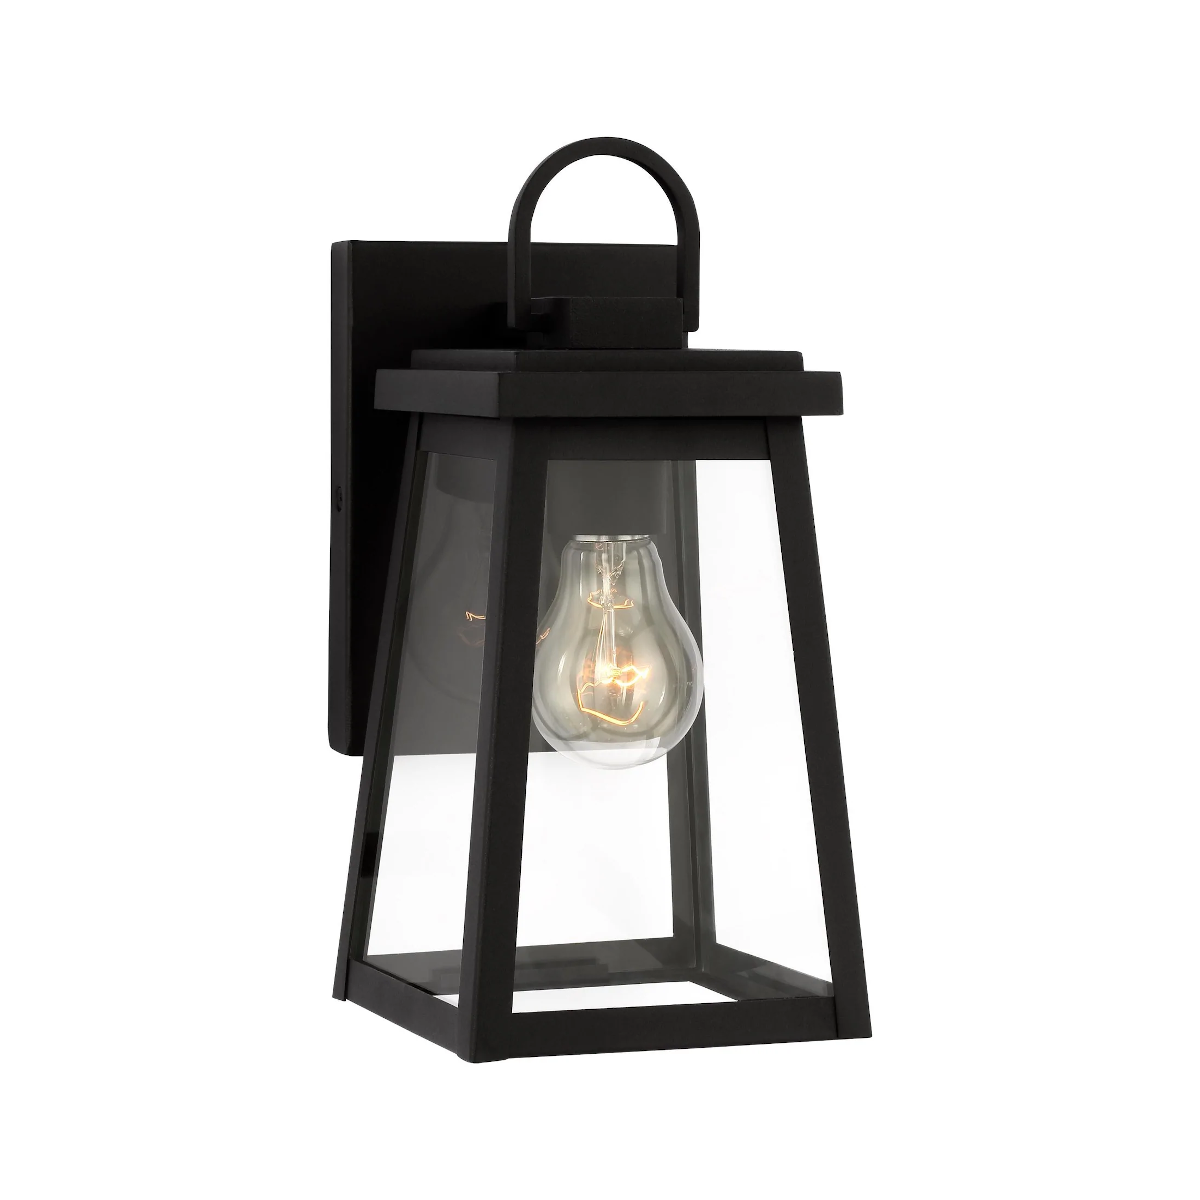 Founders Black Small Wall Lantern with Clear or White Glass